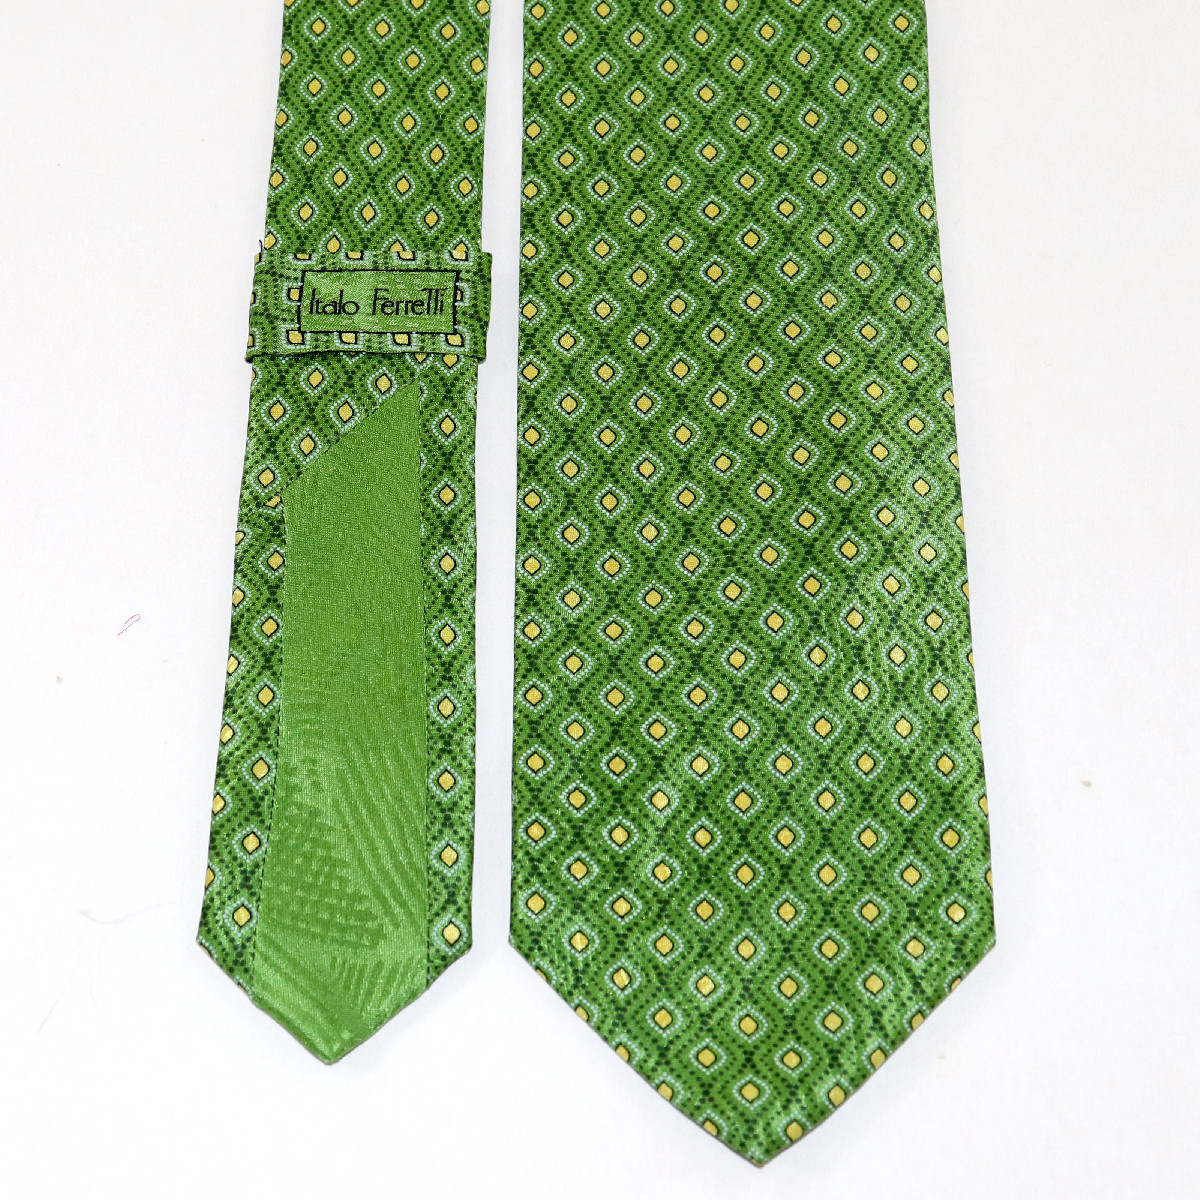 Refined Custom tie, green background and small diamond pattern ...